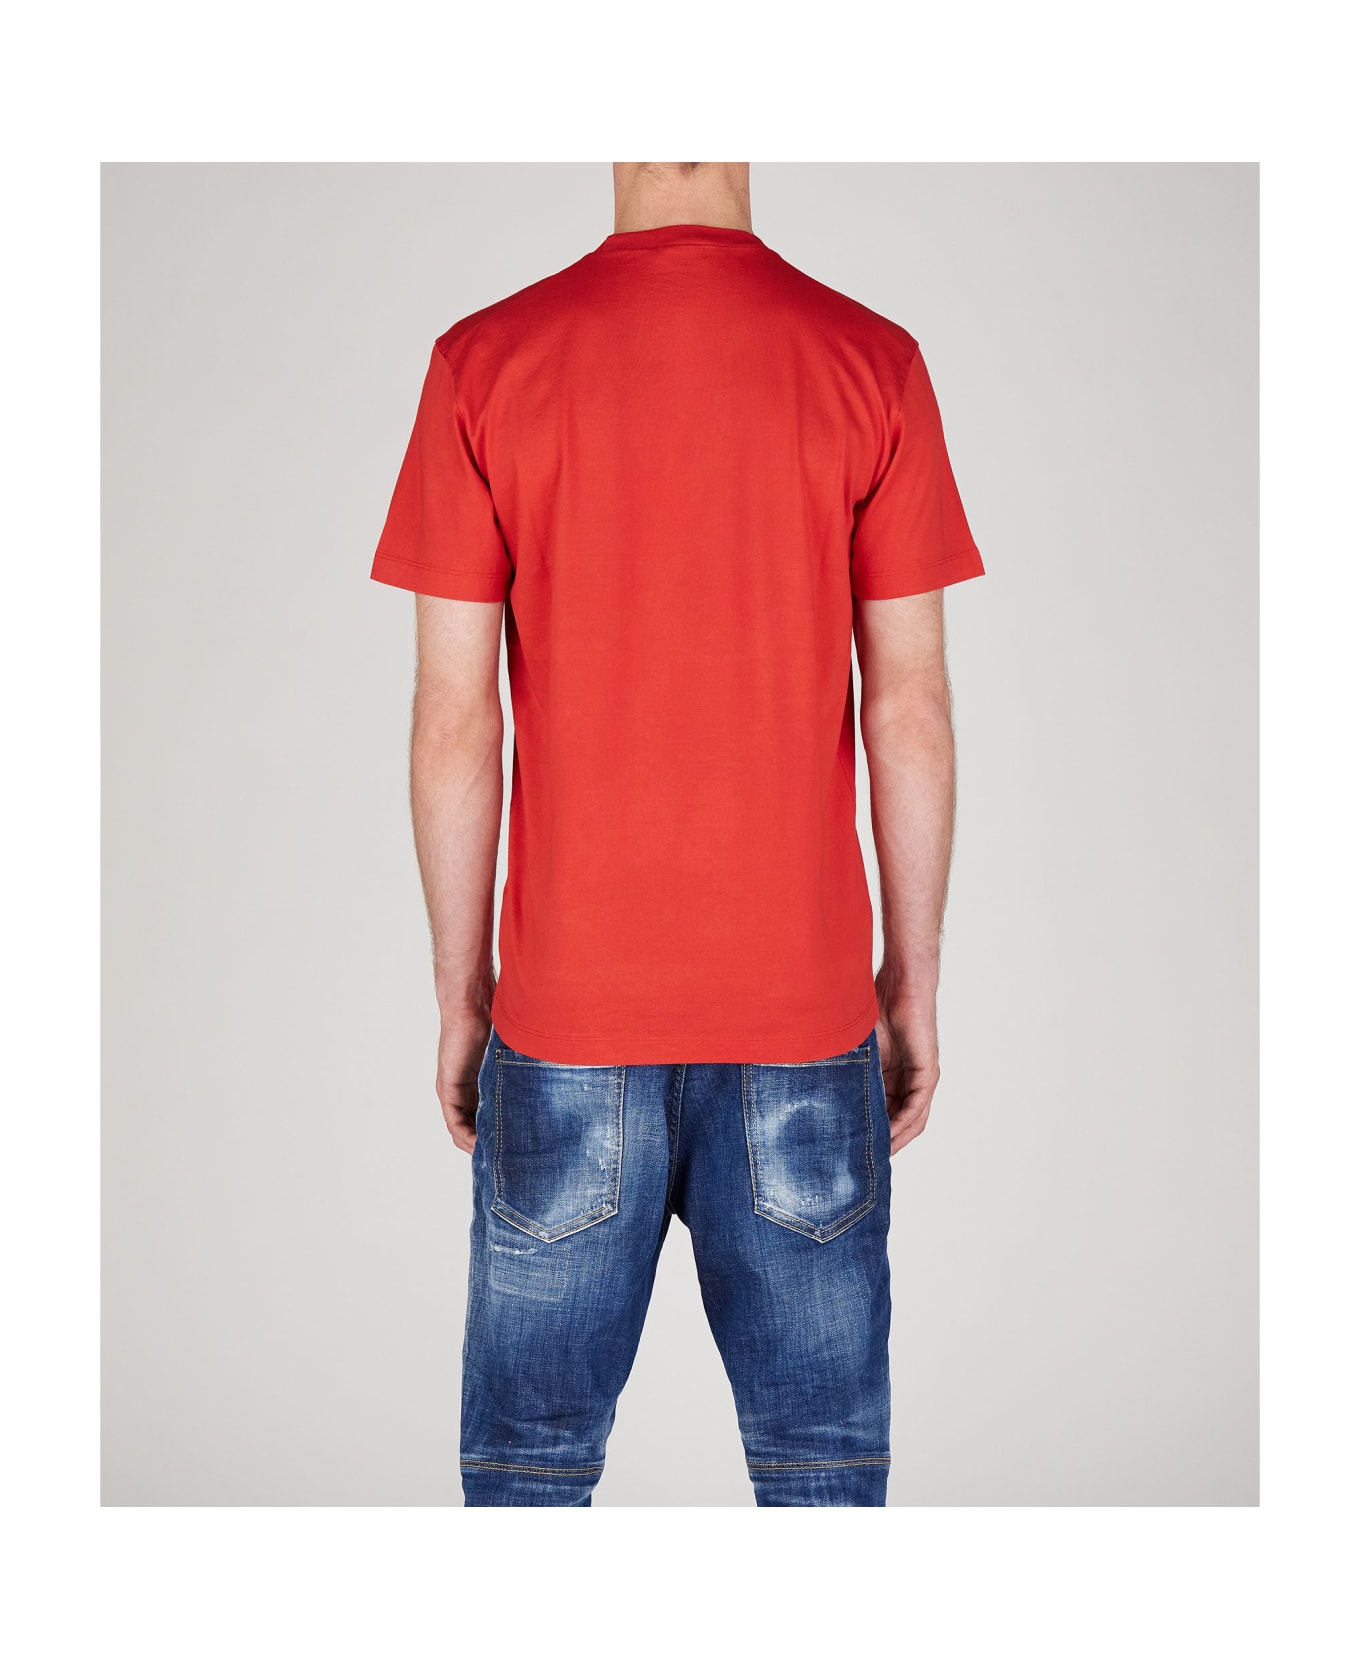 Dsquared2 T-shirts - Red